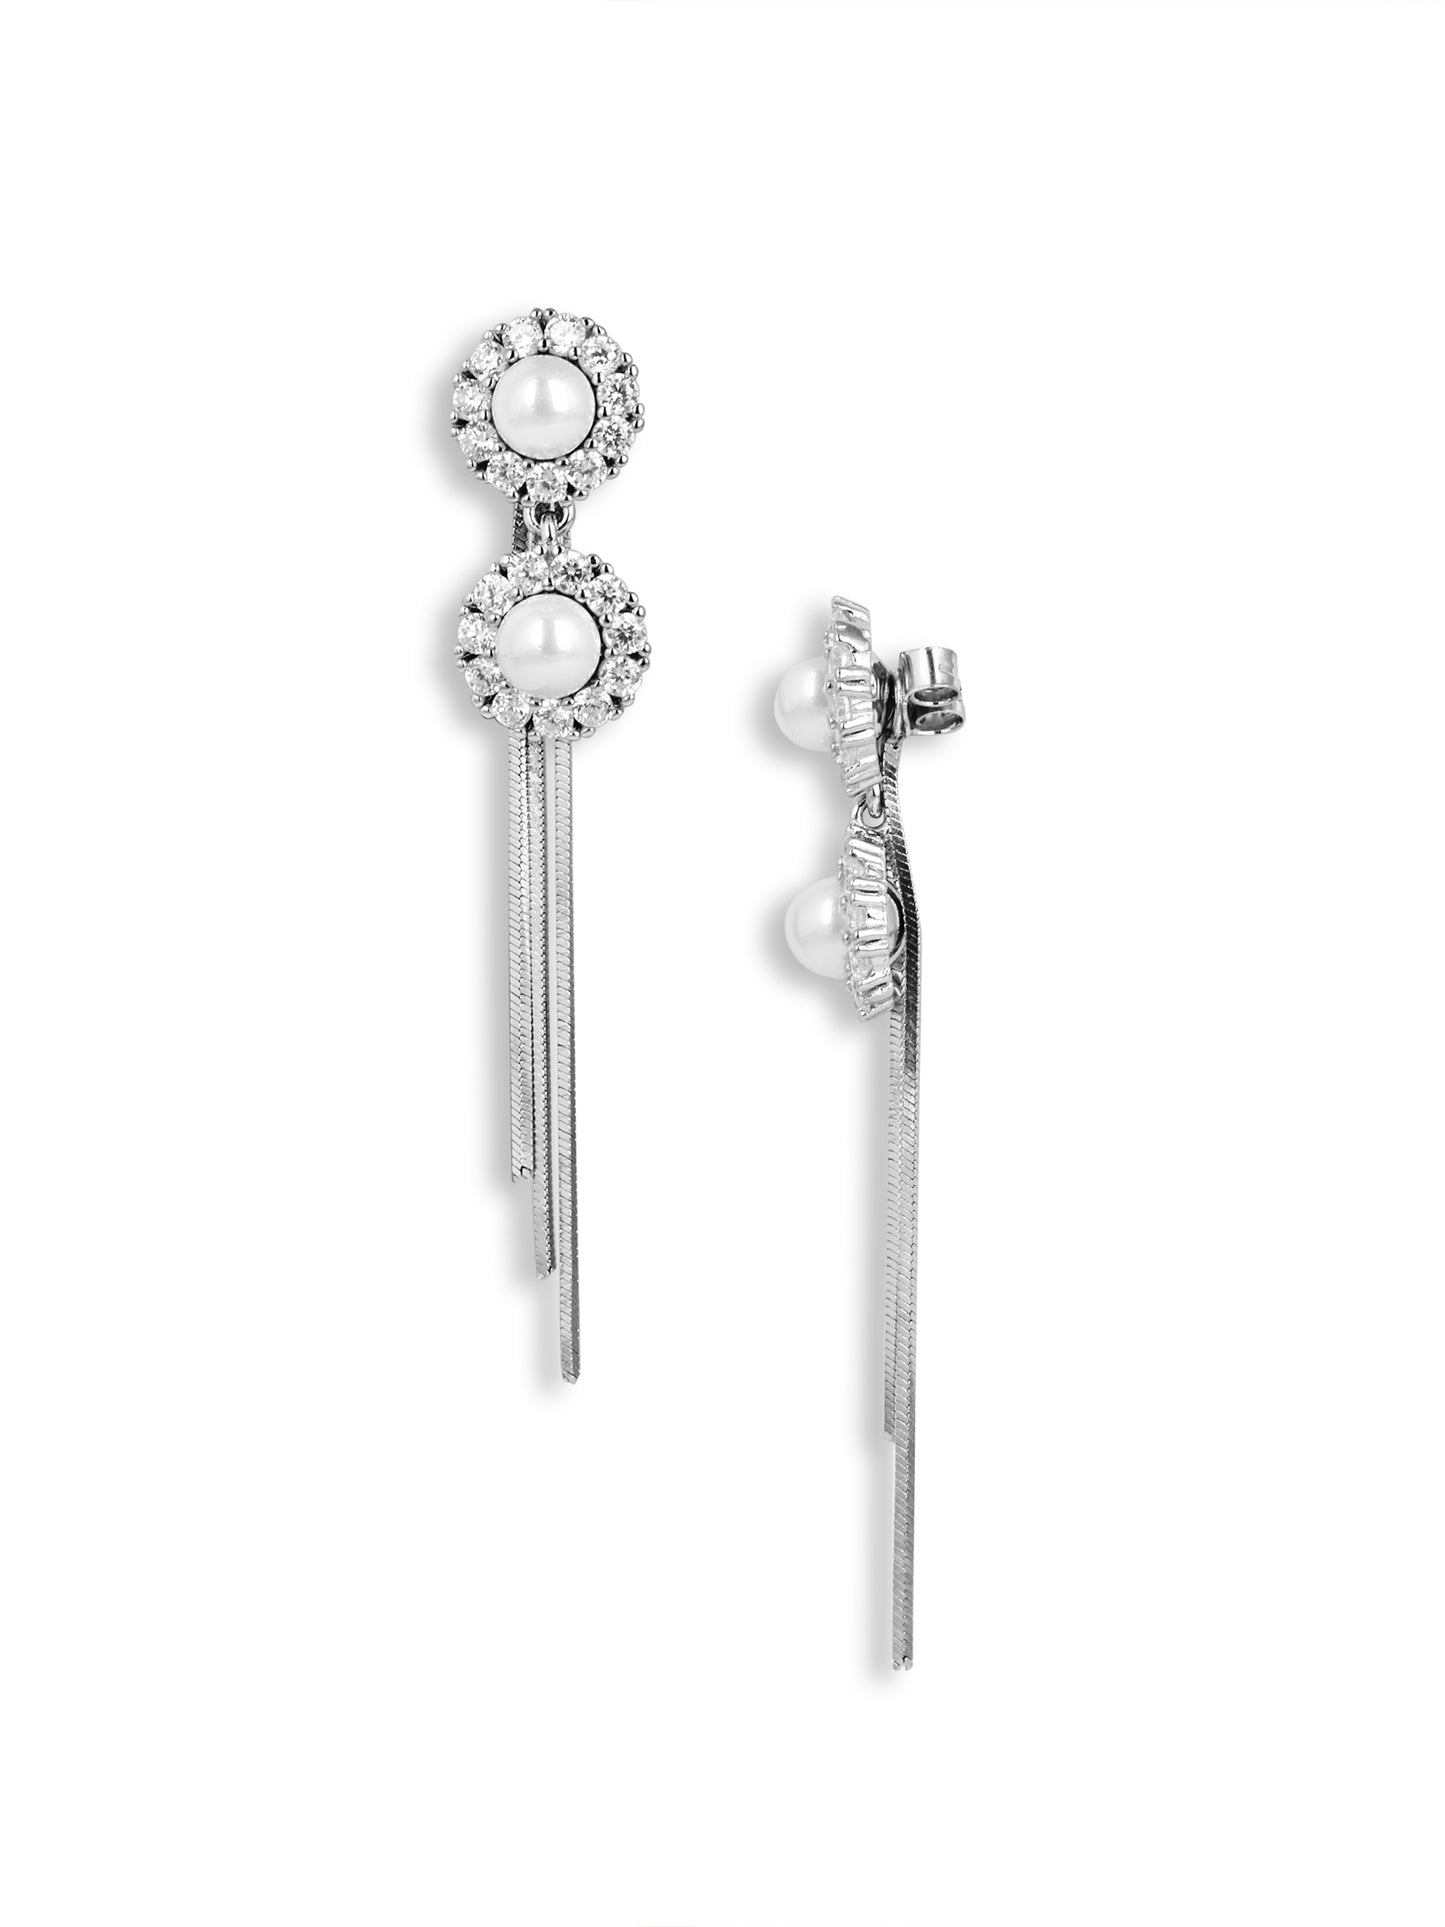 Round shape Earrings With Droplets White Gold